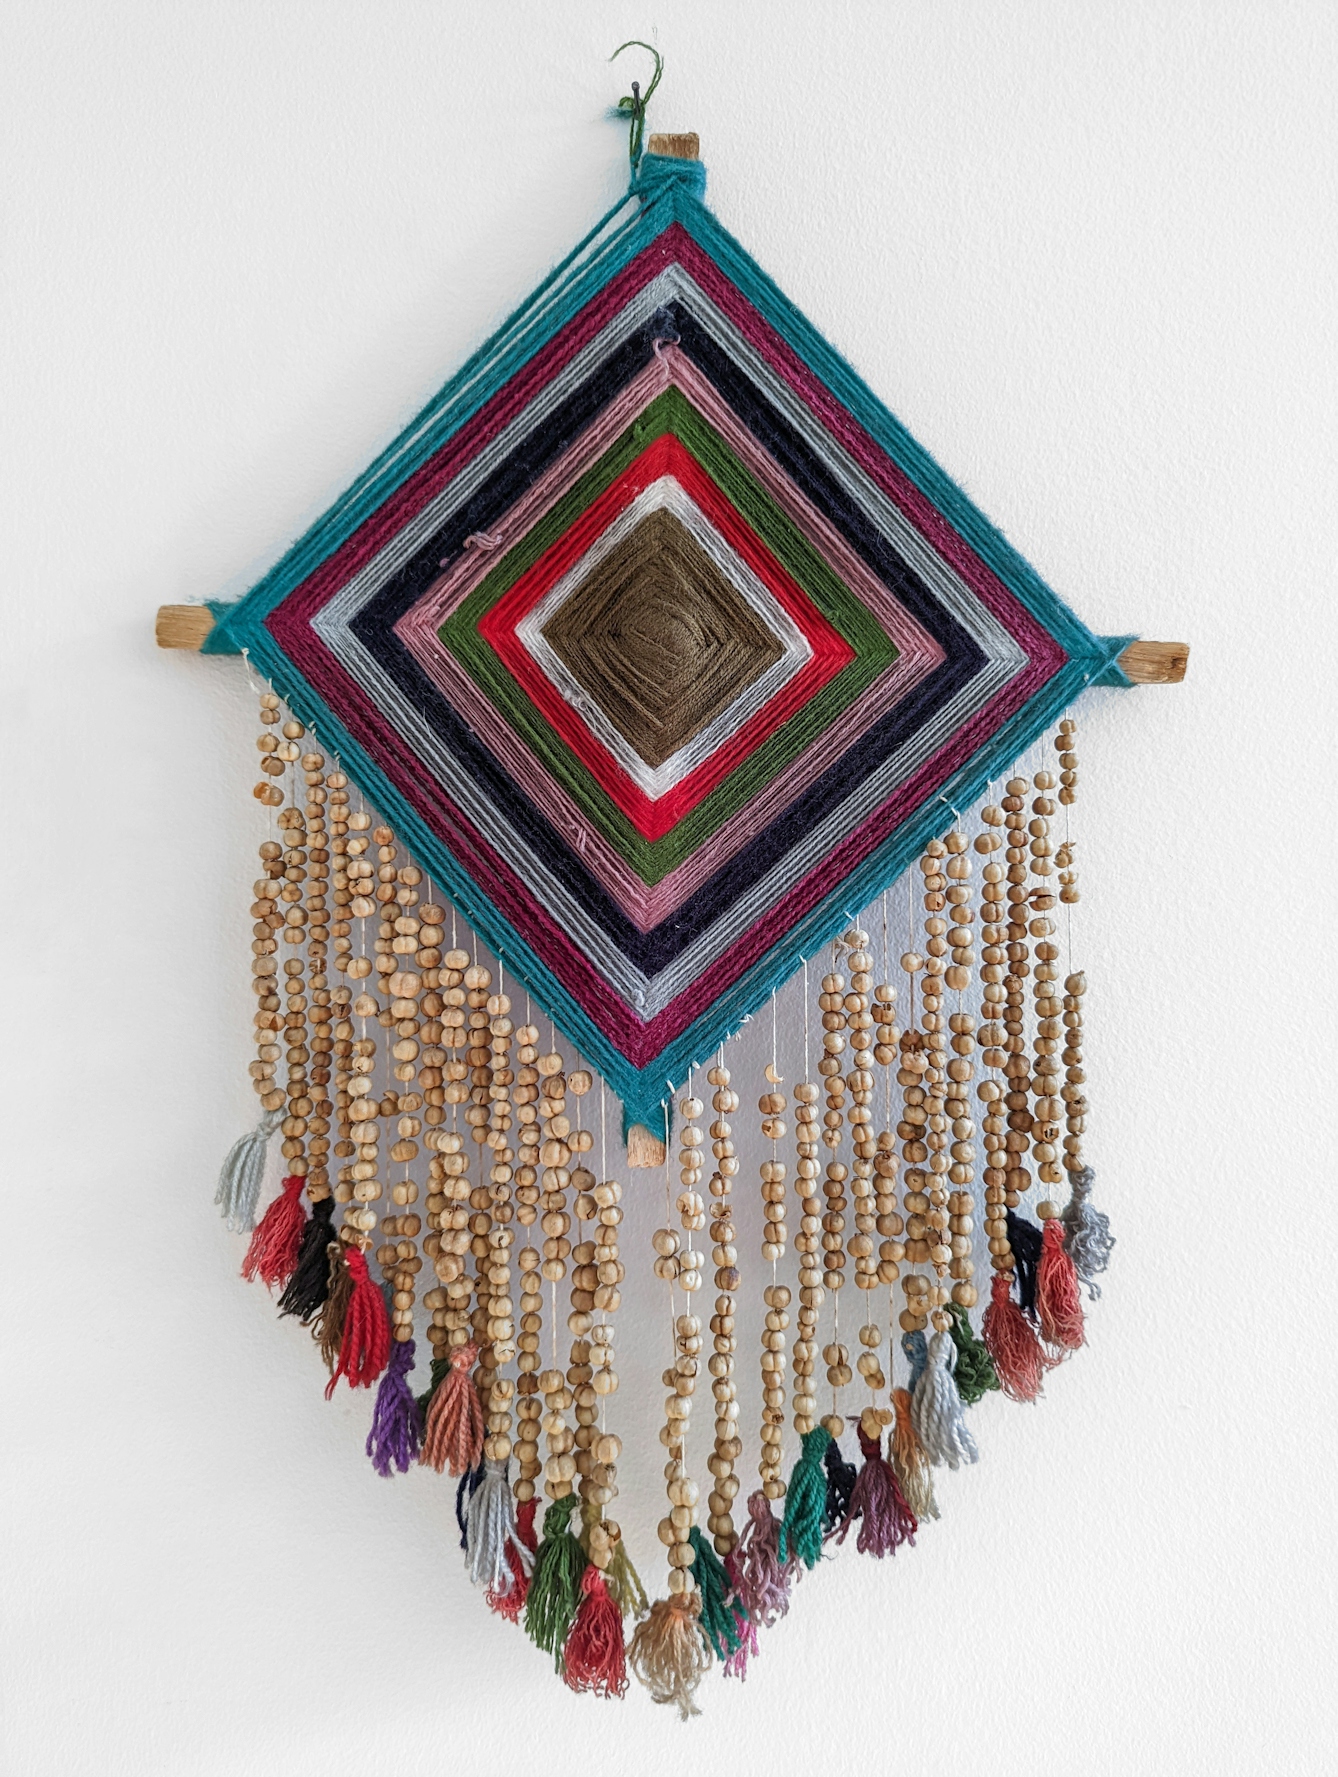 Wall-hanging made of different coloured strands of wool woven in stripes into a diamond shape on a wooden frame. Strands of rue seeds threaded onto string hang from with bottom edge of the diamond, each ending in a woolen tassle.